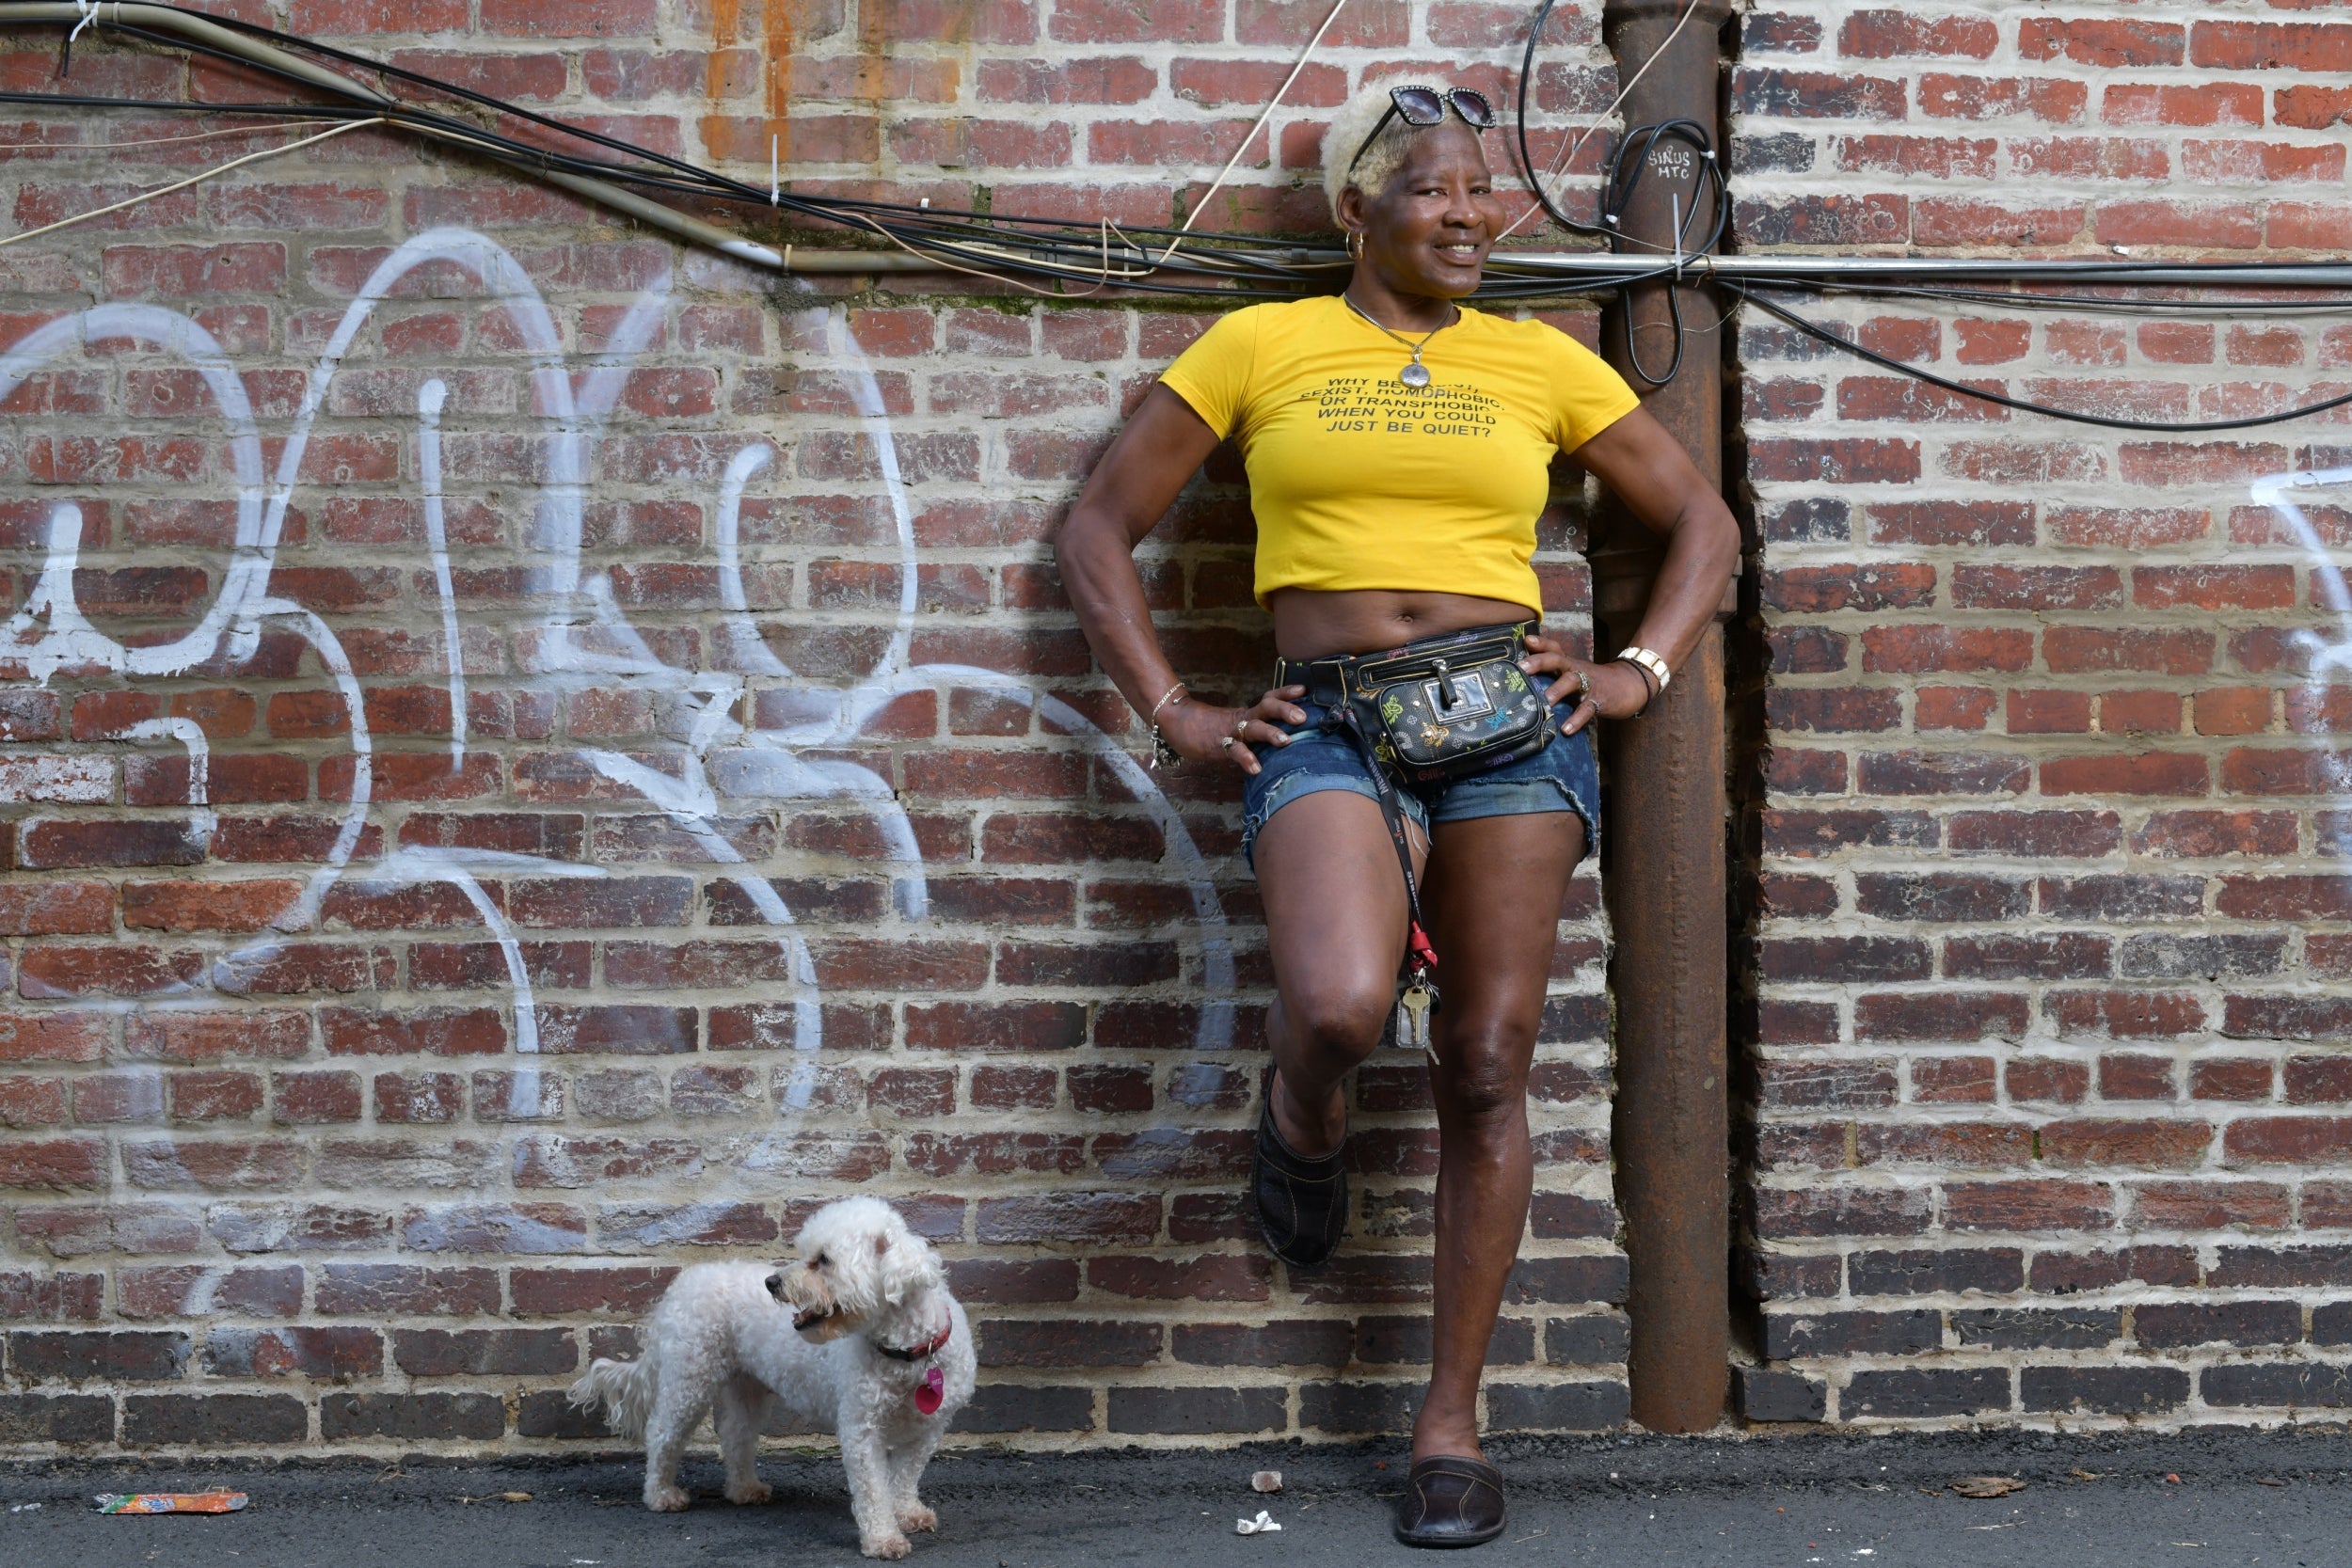 Poopoo Earls, with her dog Princess. Earls, now 64, ran through the streets of Washington with other outraged young people after the assassination of Martin Luther King Jr